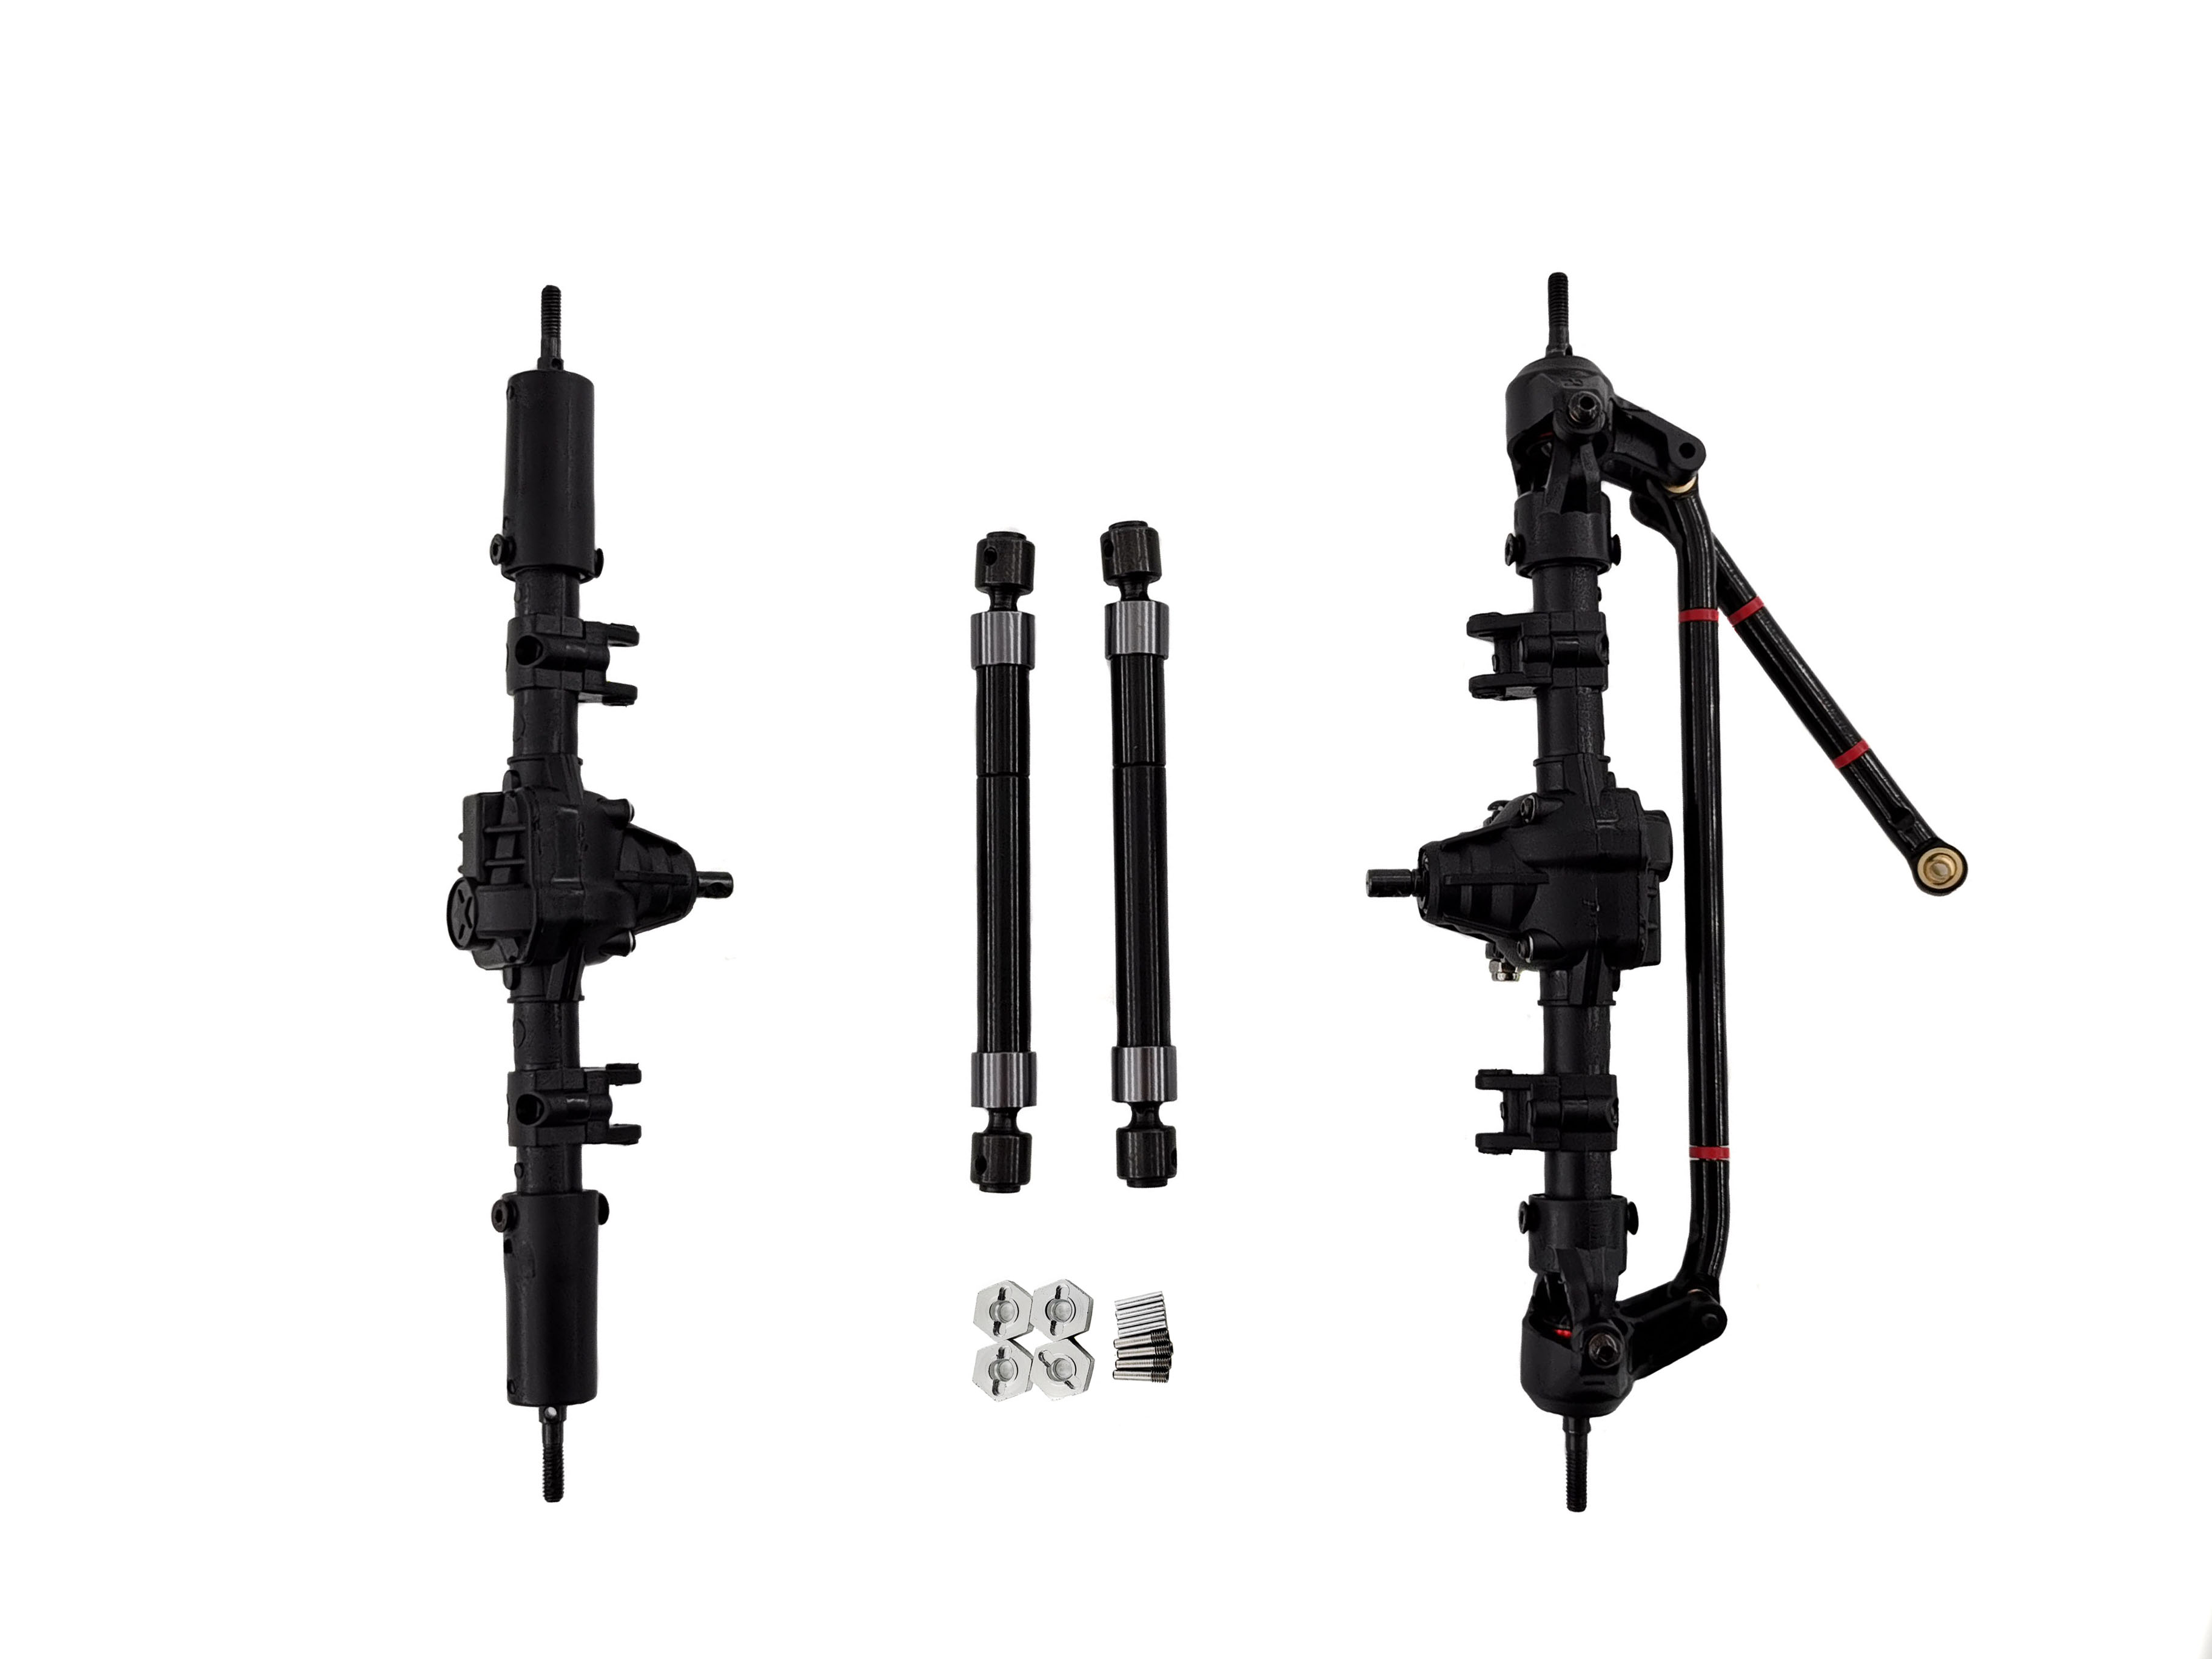 1/10 RC Car Front & Rear Bridge Axle Shaft Transmission Bridge with Differential for SCX10 SCX10 II 90046 90047 313mm 12.3in Wheelbase Assembled Frame Chassis With differential_Front and rear axles + drive shafts